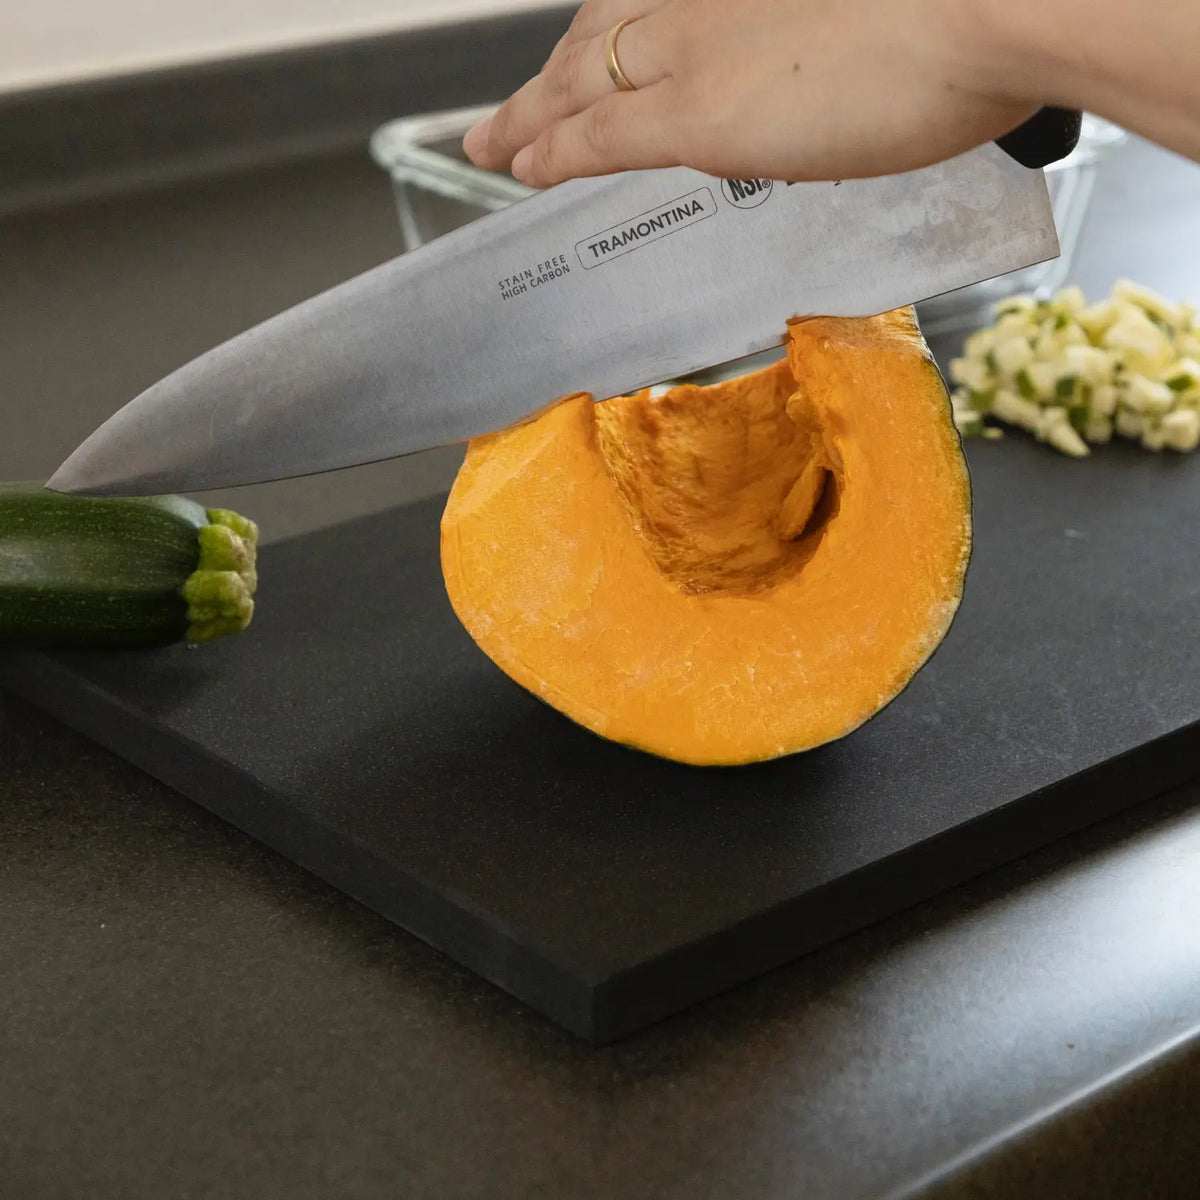 Naturally Antibacterial Chopping Boards For Your Kitchen - Eco Food Boards